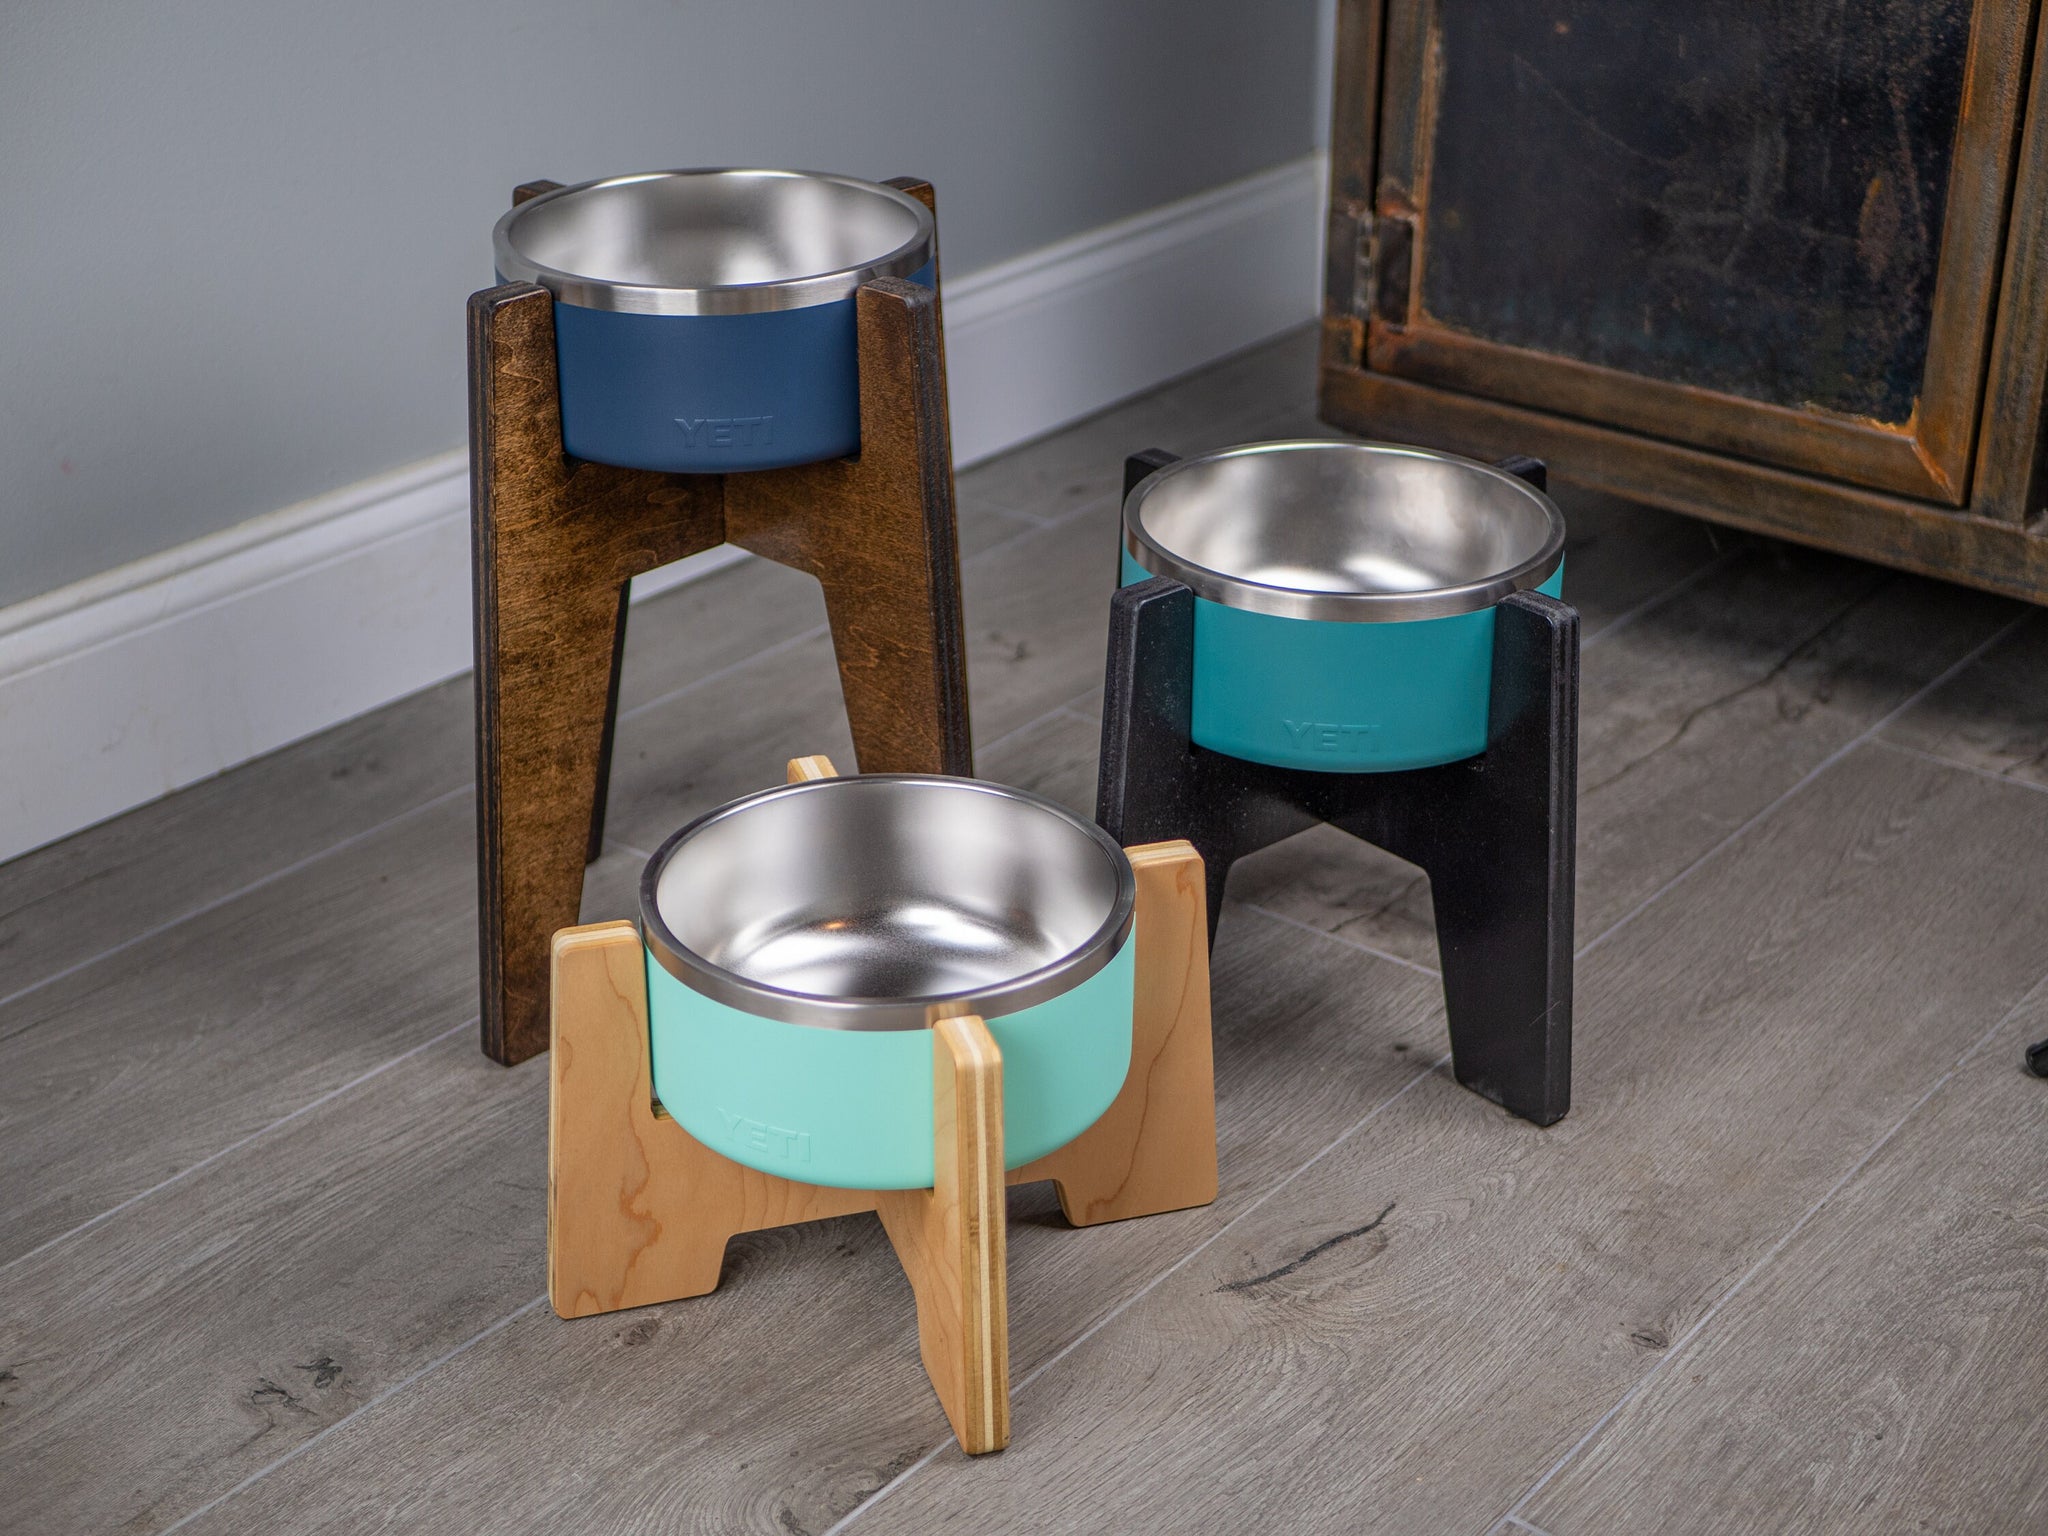 Yeti Wall Mounted Raised Dog Bowl Stand - Bowl(s) Not Included – Woodland  Steelworks